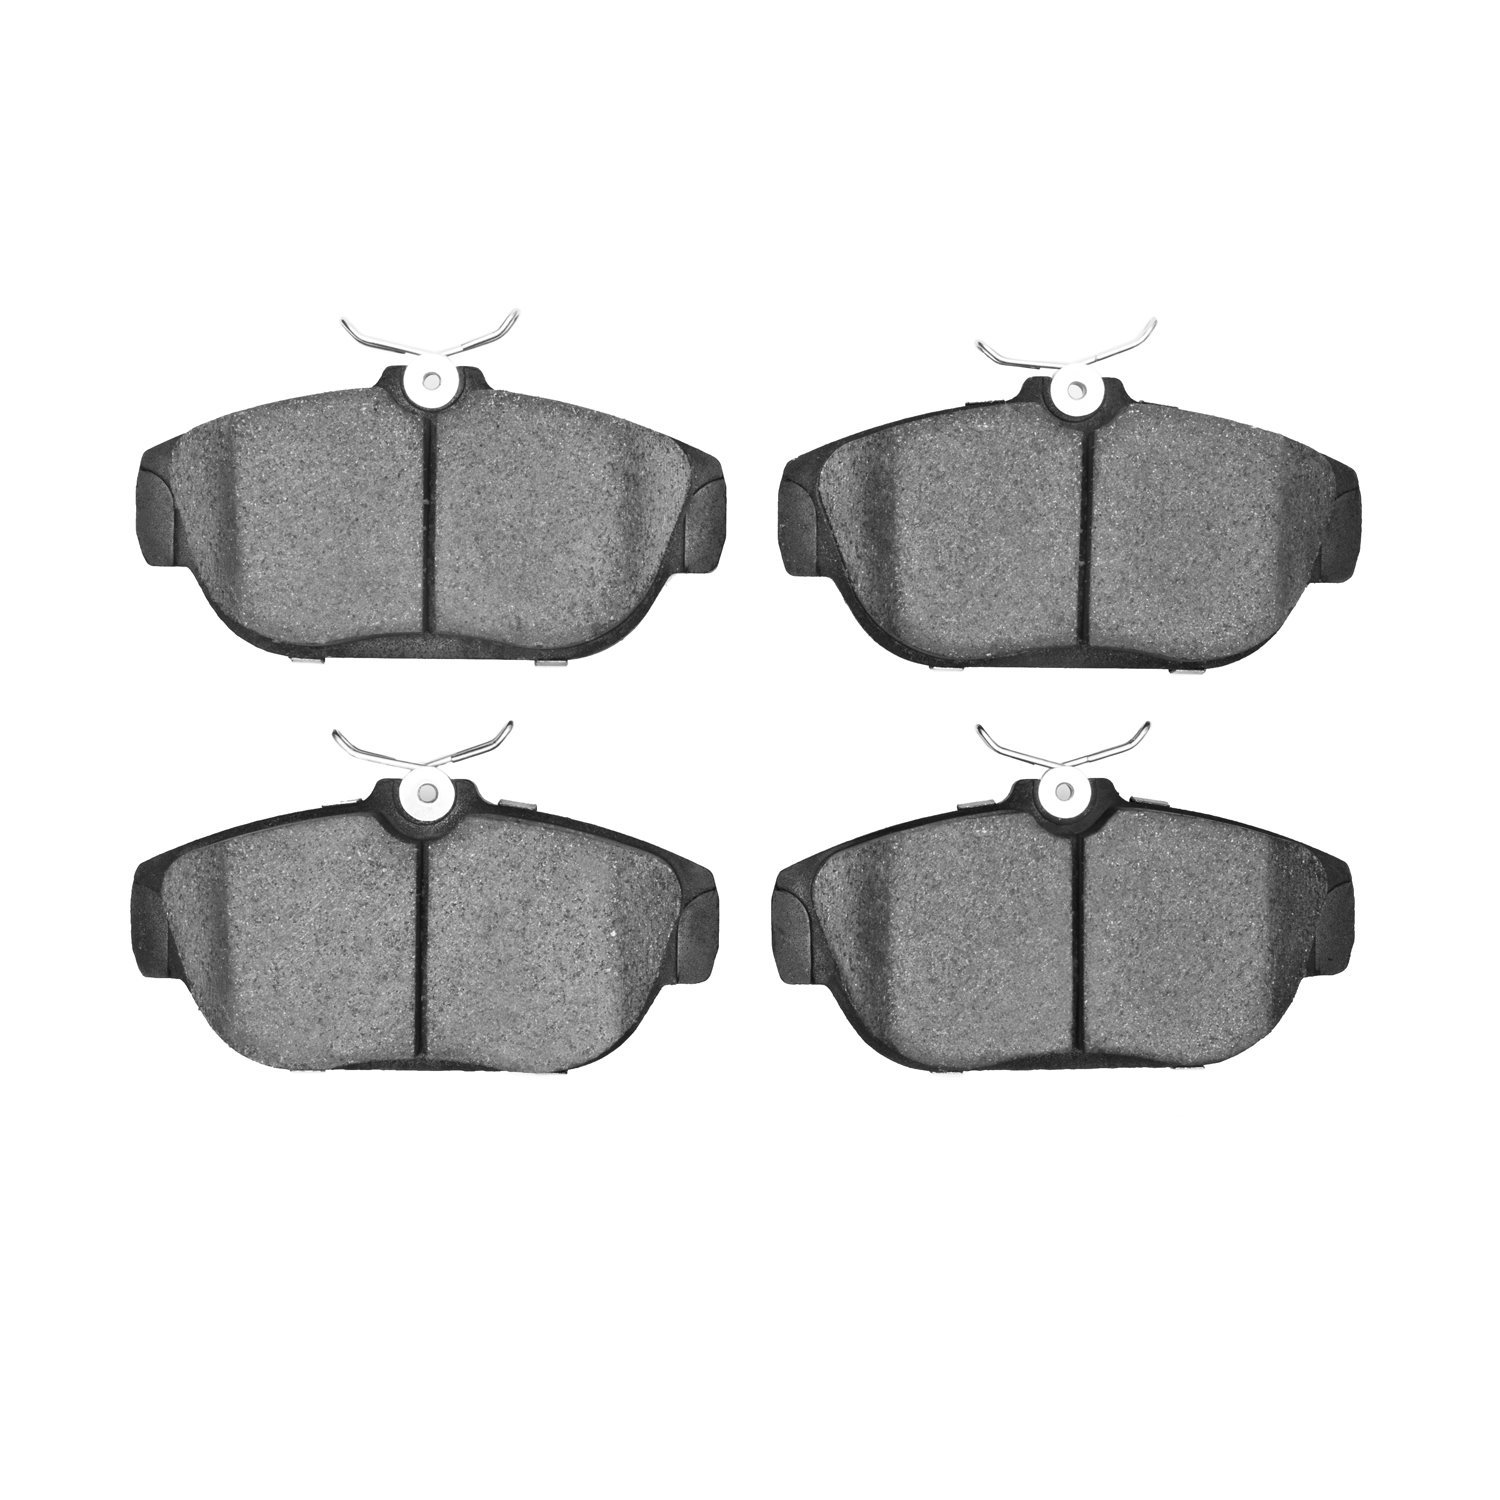 1903-0542-00 Premium Riveted Brake Shoes, 1983-1999 Ford/Lincoln/Mercury/Mazda, Position: Rr